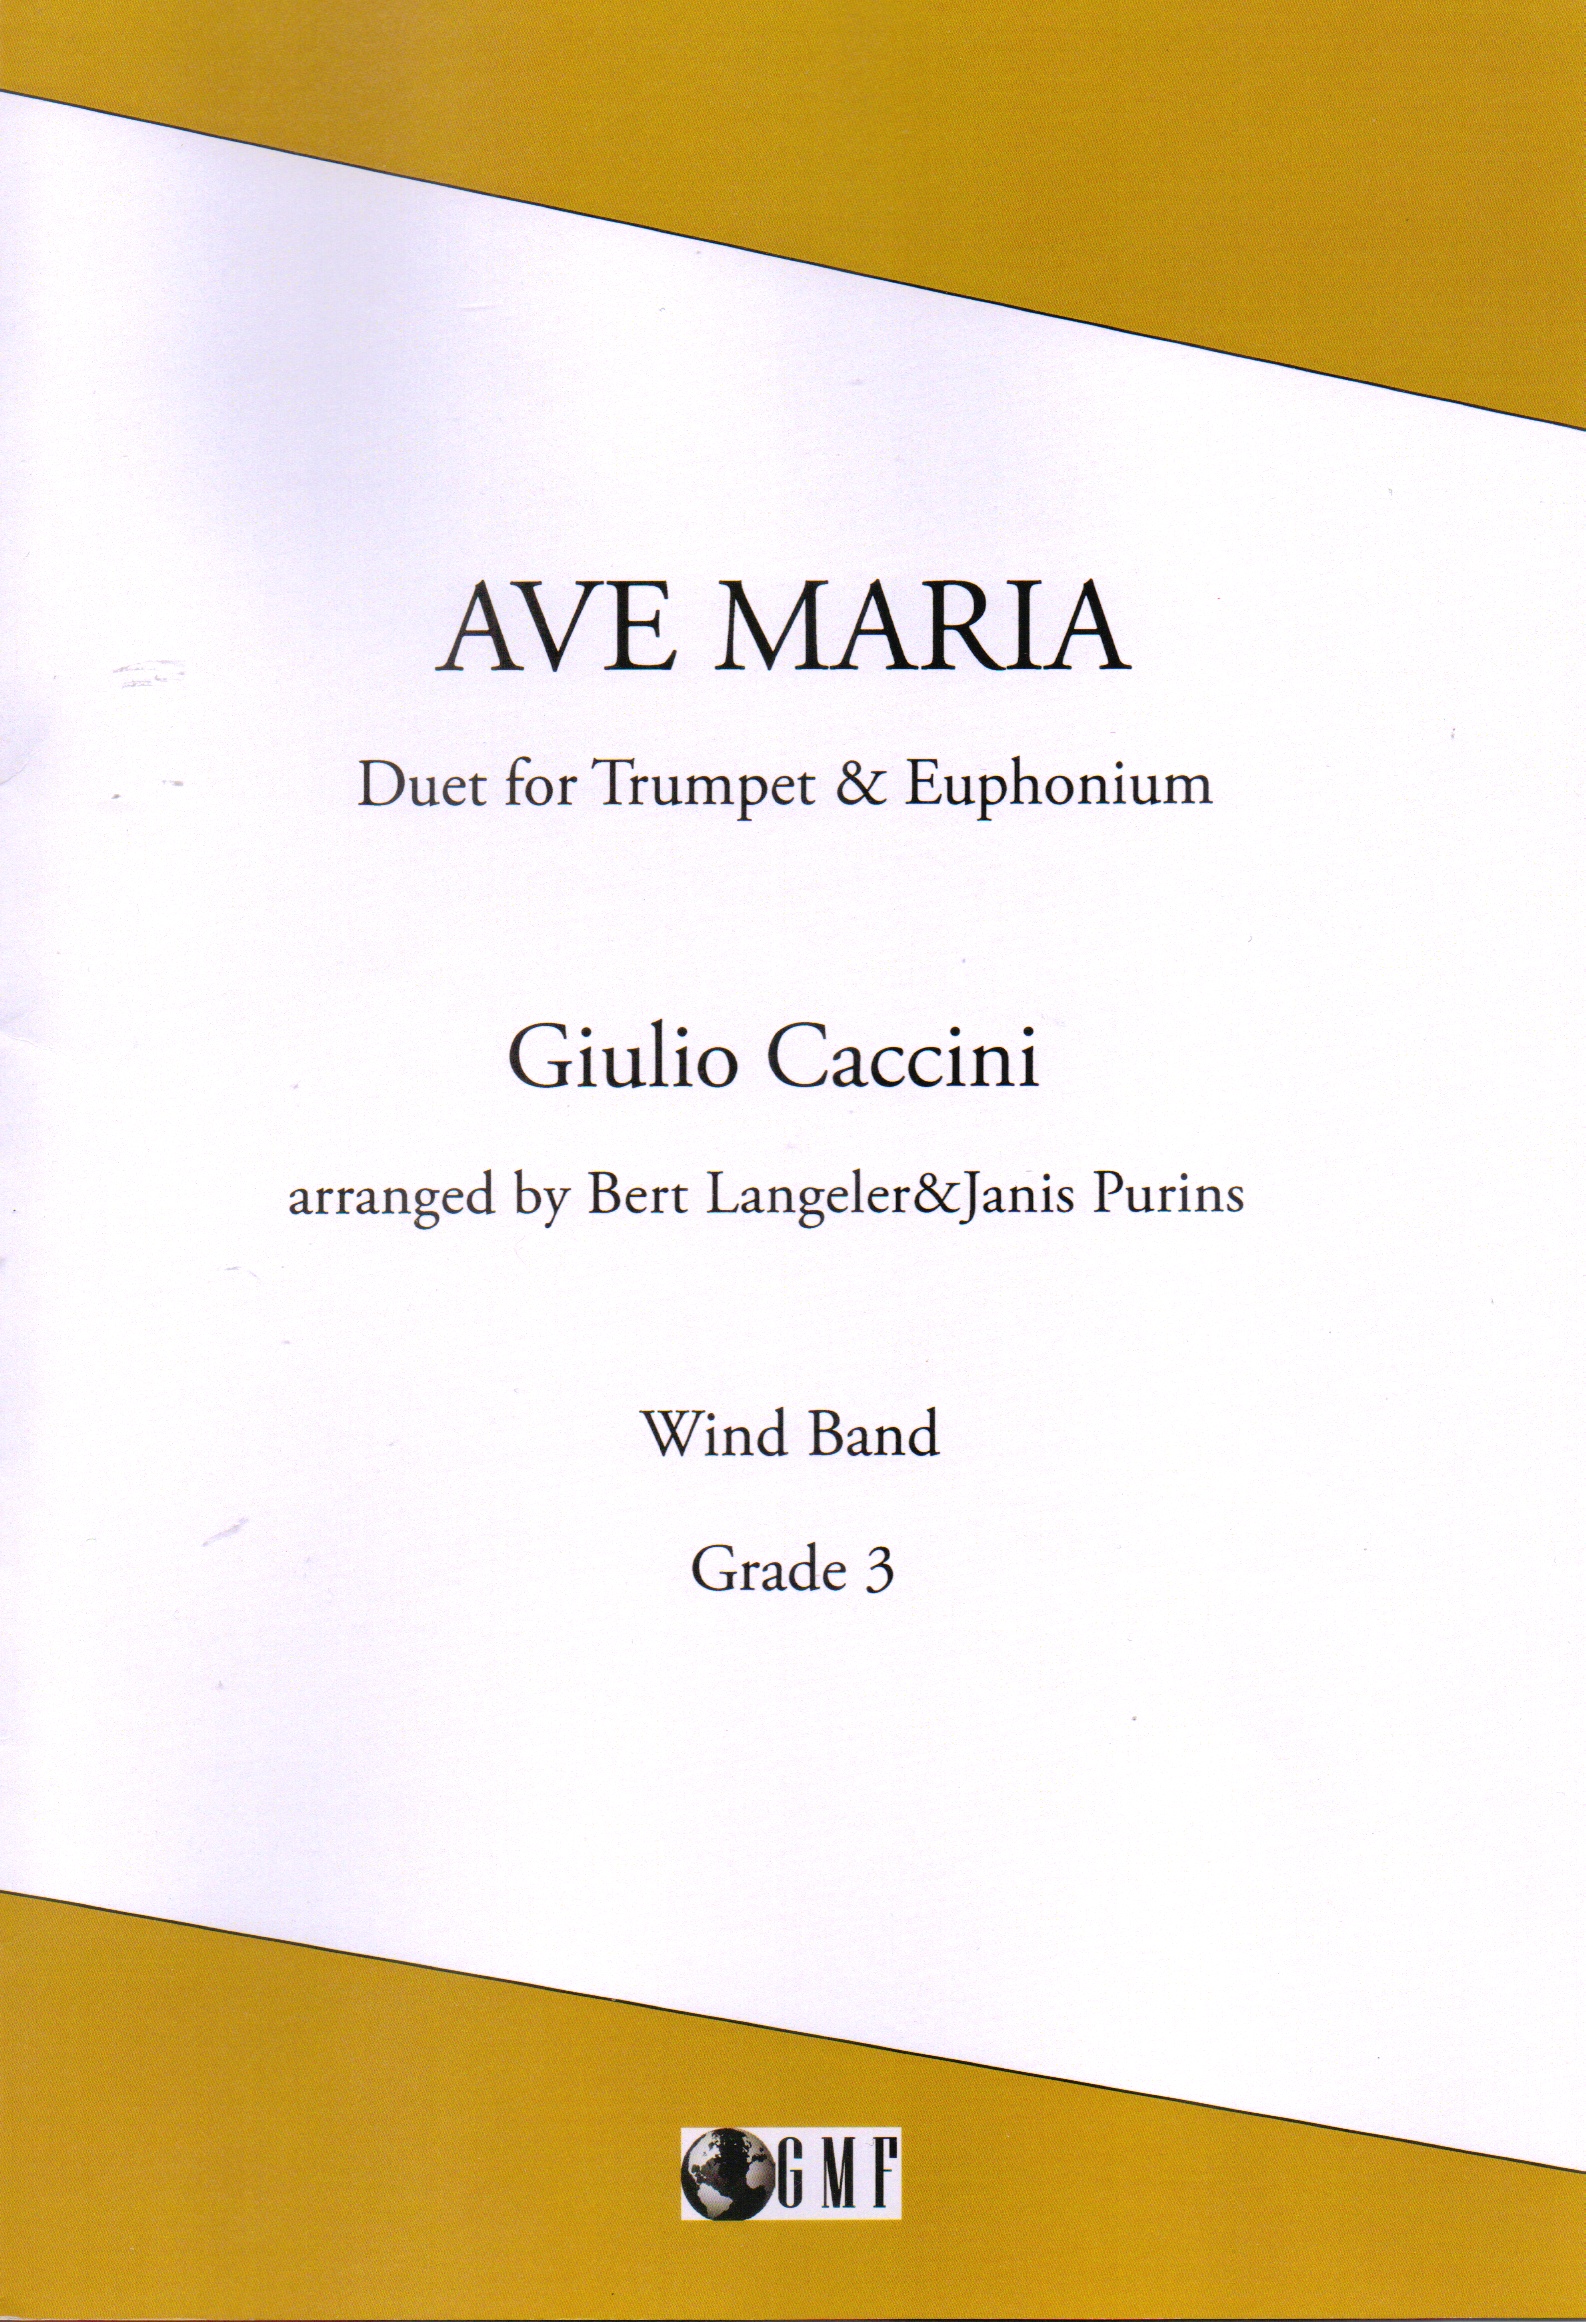 Ave Maria - Giulio Caccini Arr.Langeler/Purins - Duet for Euphonium & Trumpet and Wind Band